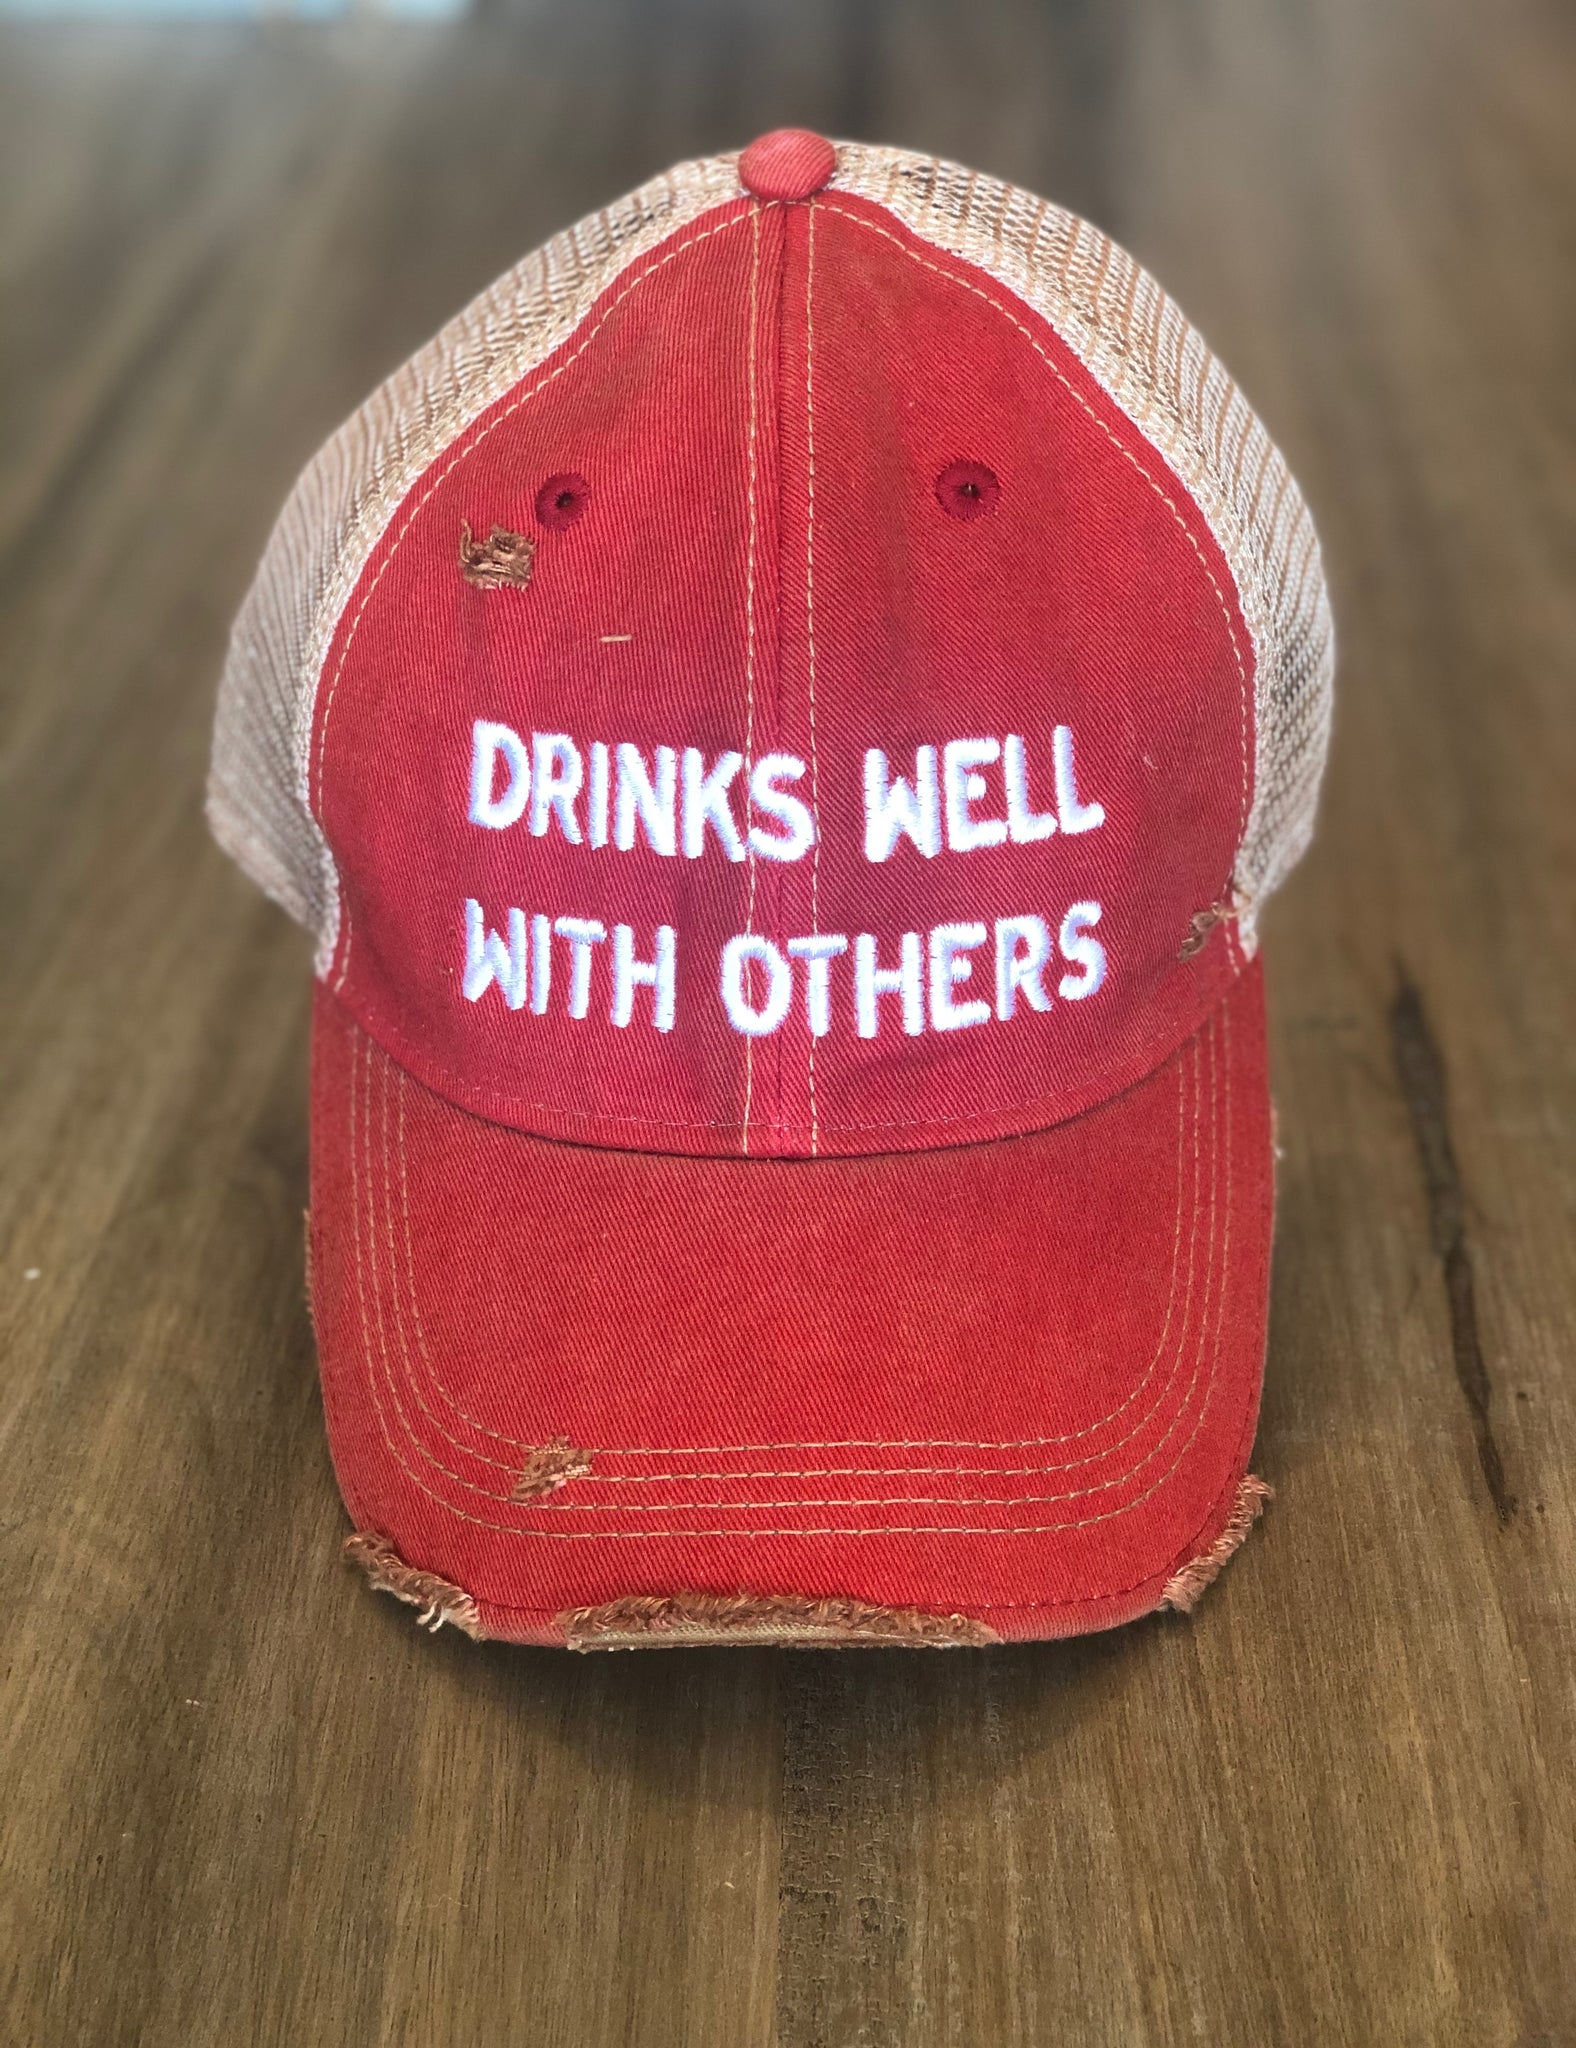 The Original Retro Brand Drinks Well With Others Trucker Hat - Showroom56